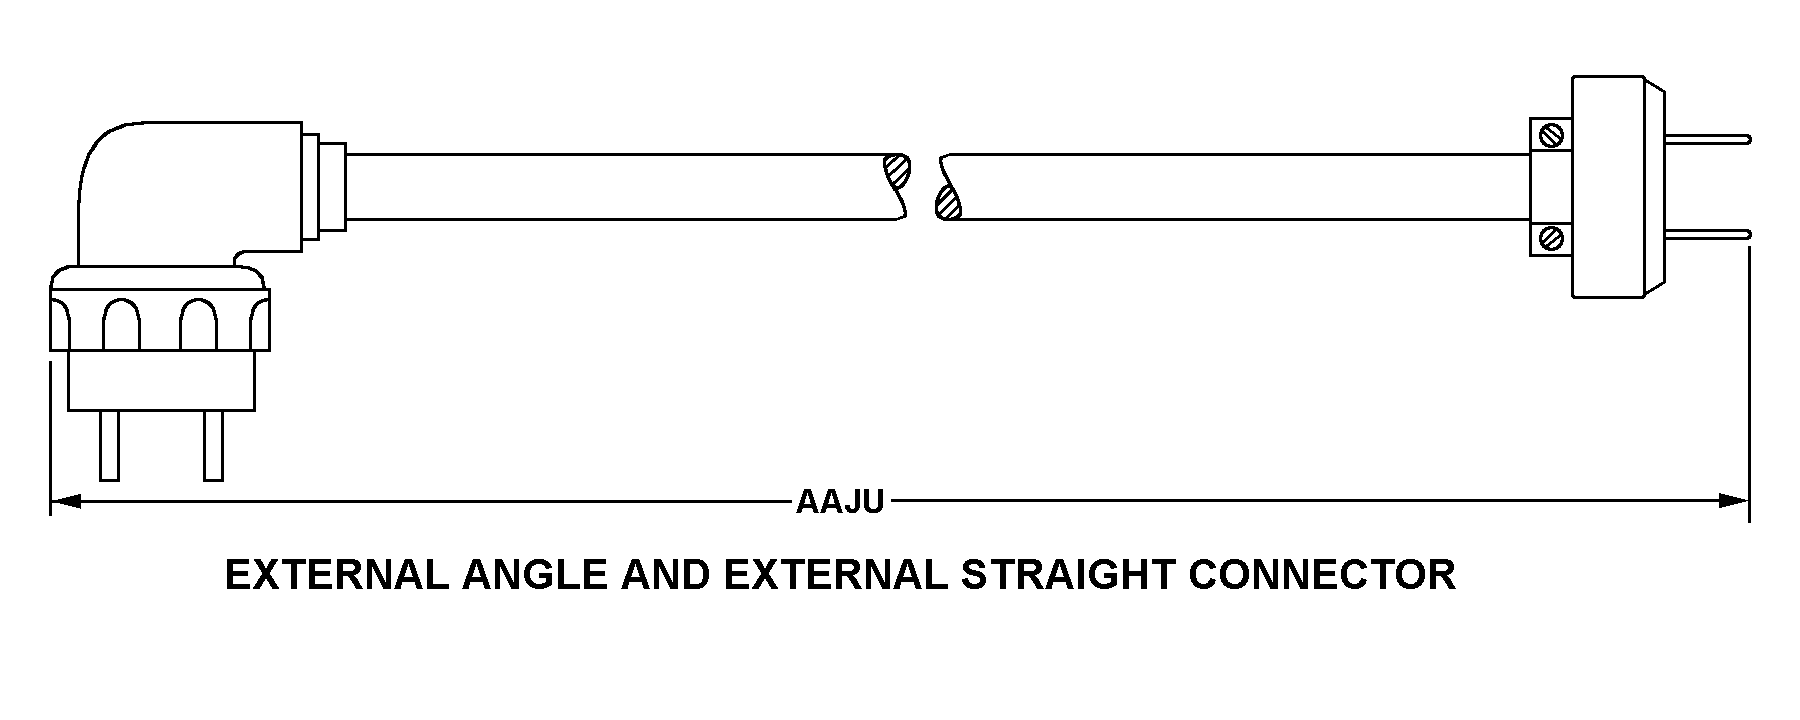 EXTERNAL ANGLE AND EXTERNAL STRAIGHT CONNECTOR style nsn 5995-01-397-6085